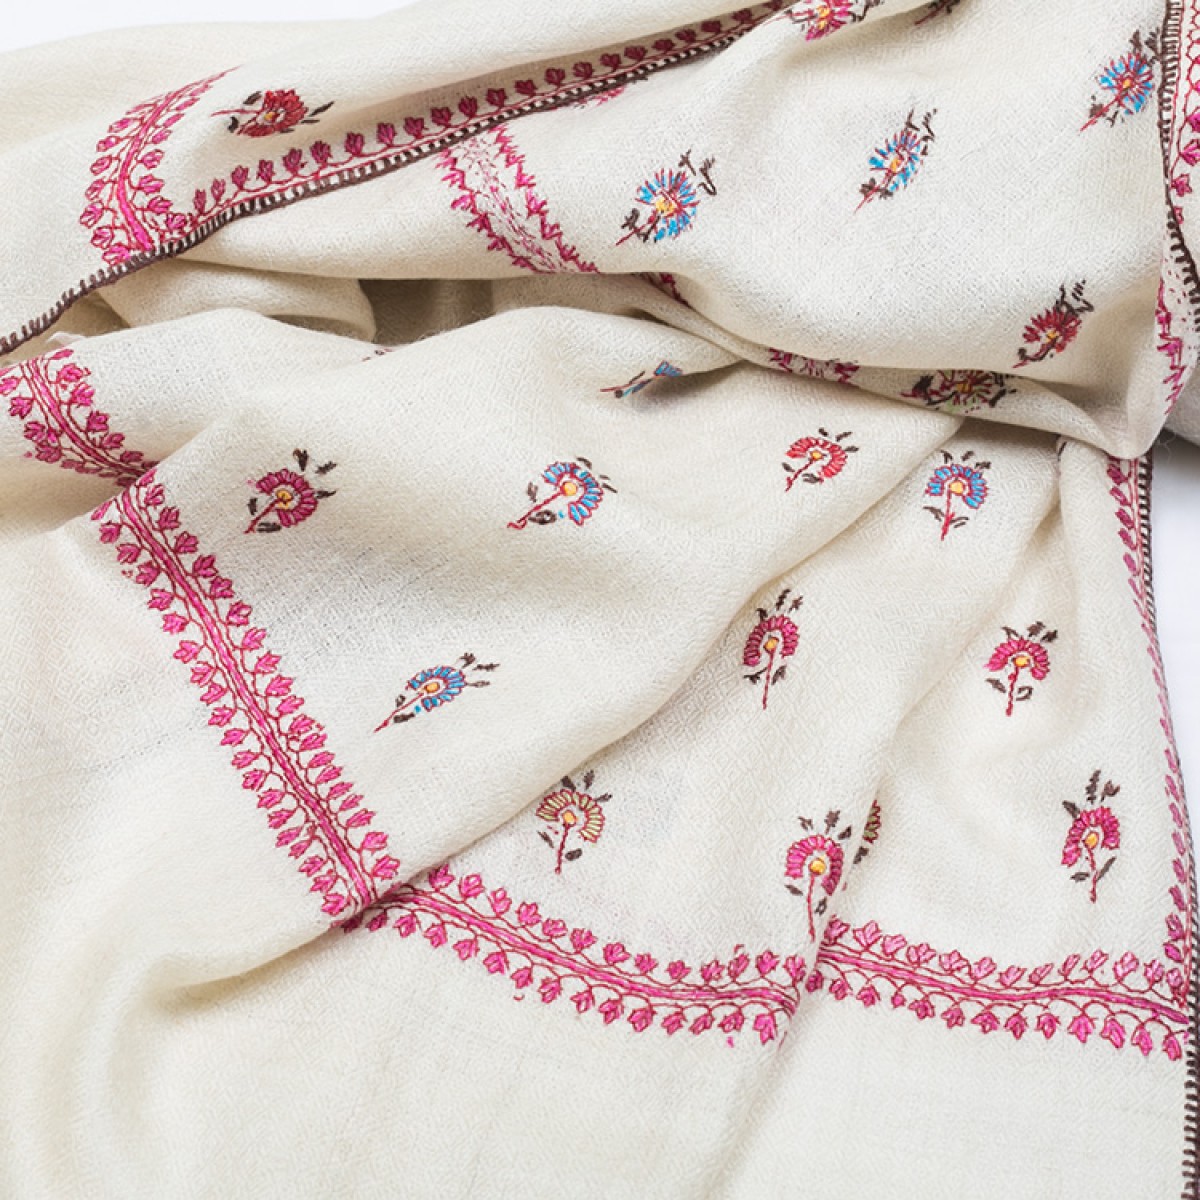 Embroidered Pashmina Stole - Off White